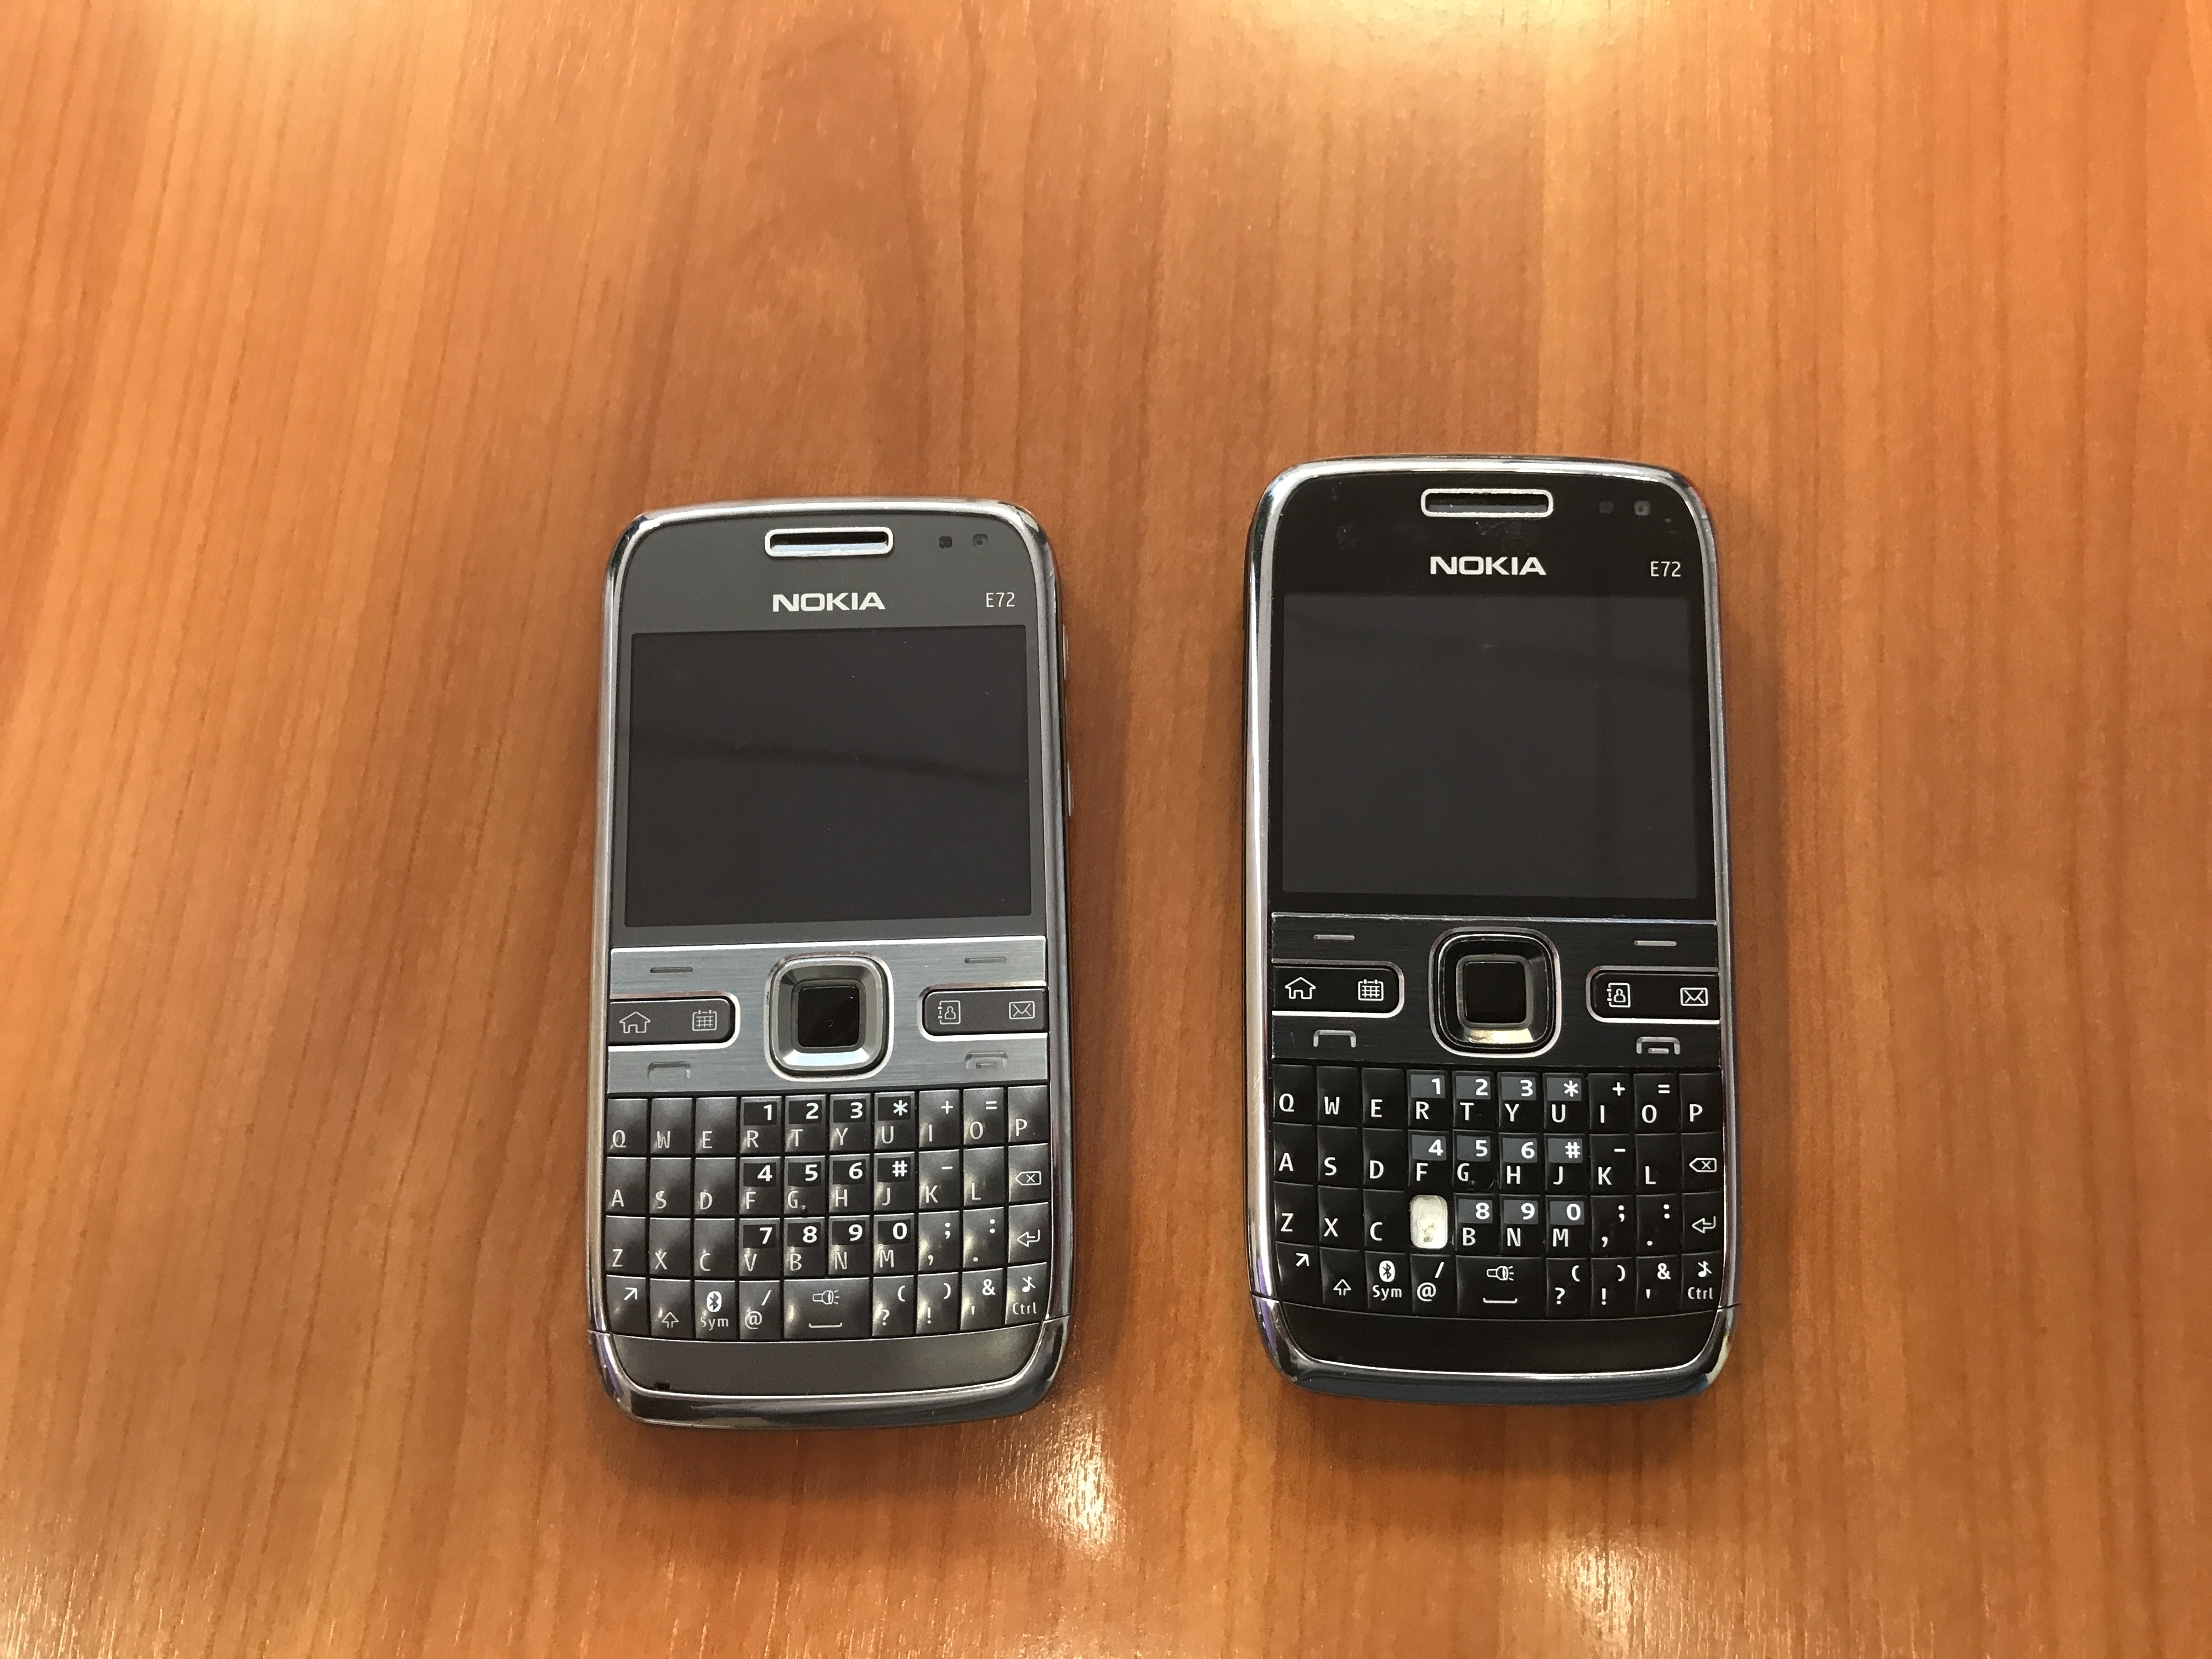 2 x Nokia E72 Mobile phones, One Phone Damaged, (No Chargers)